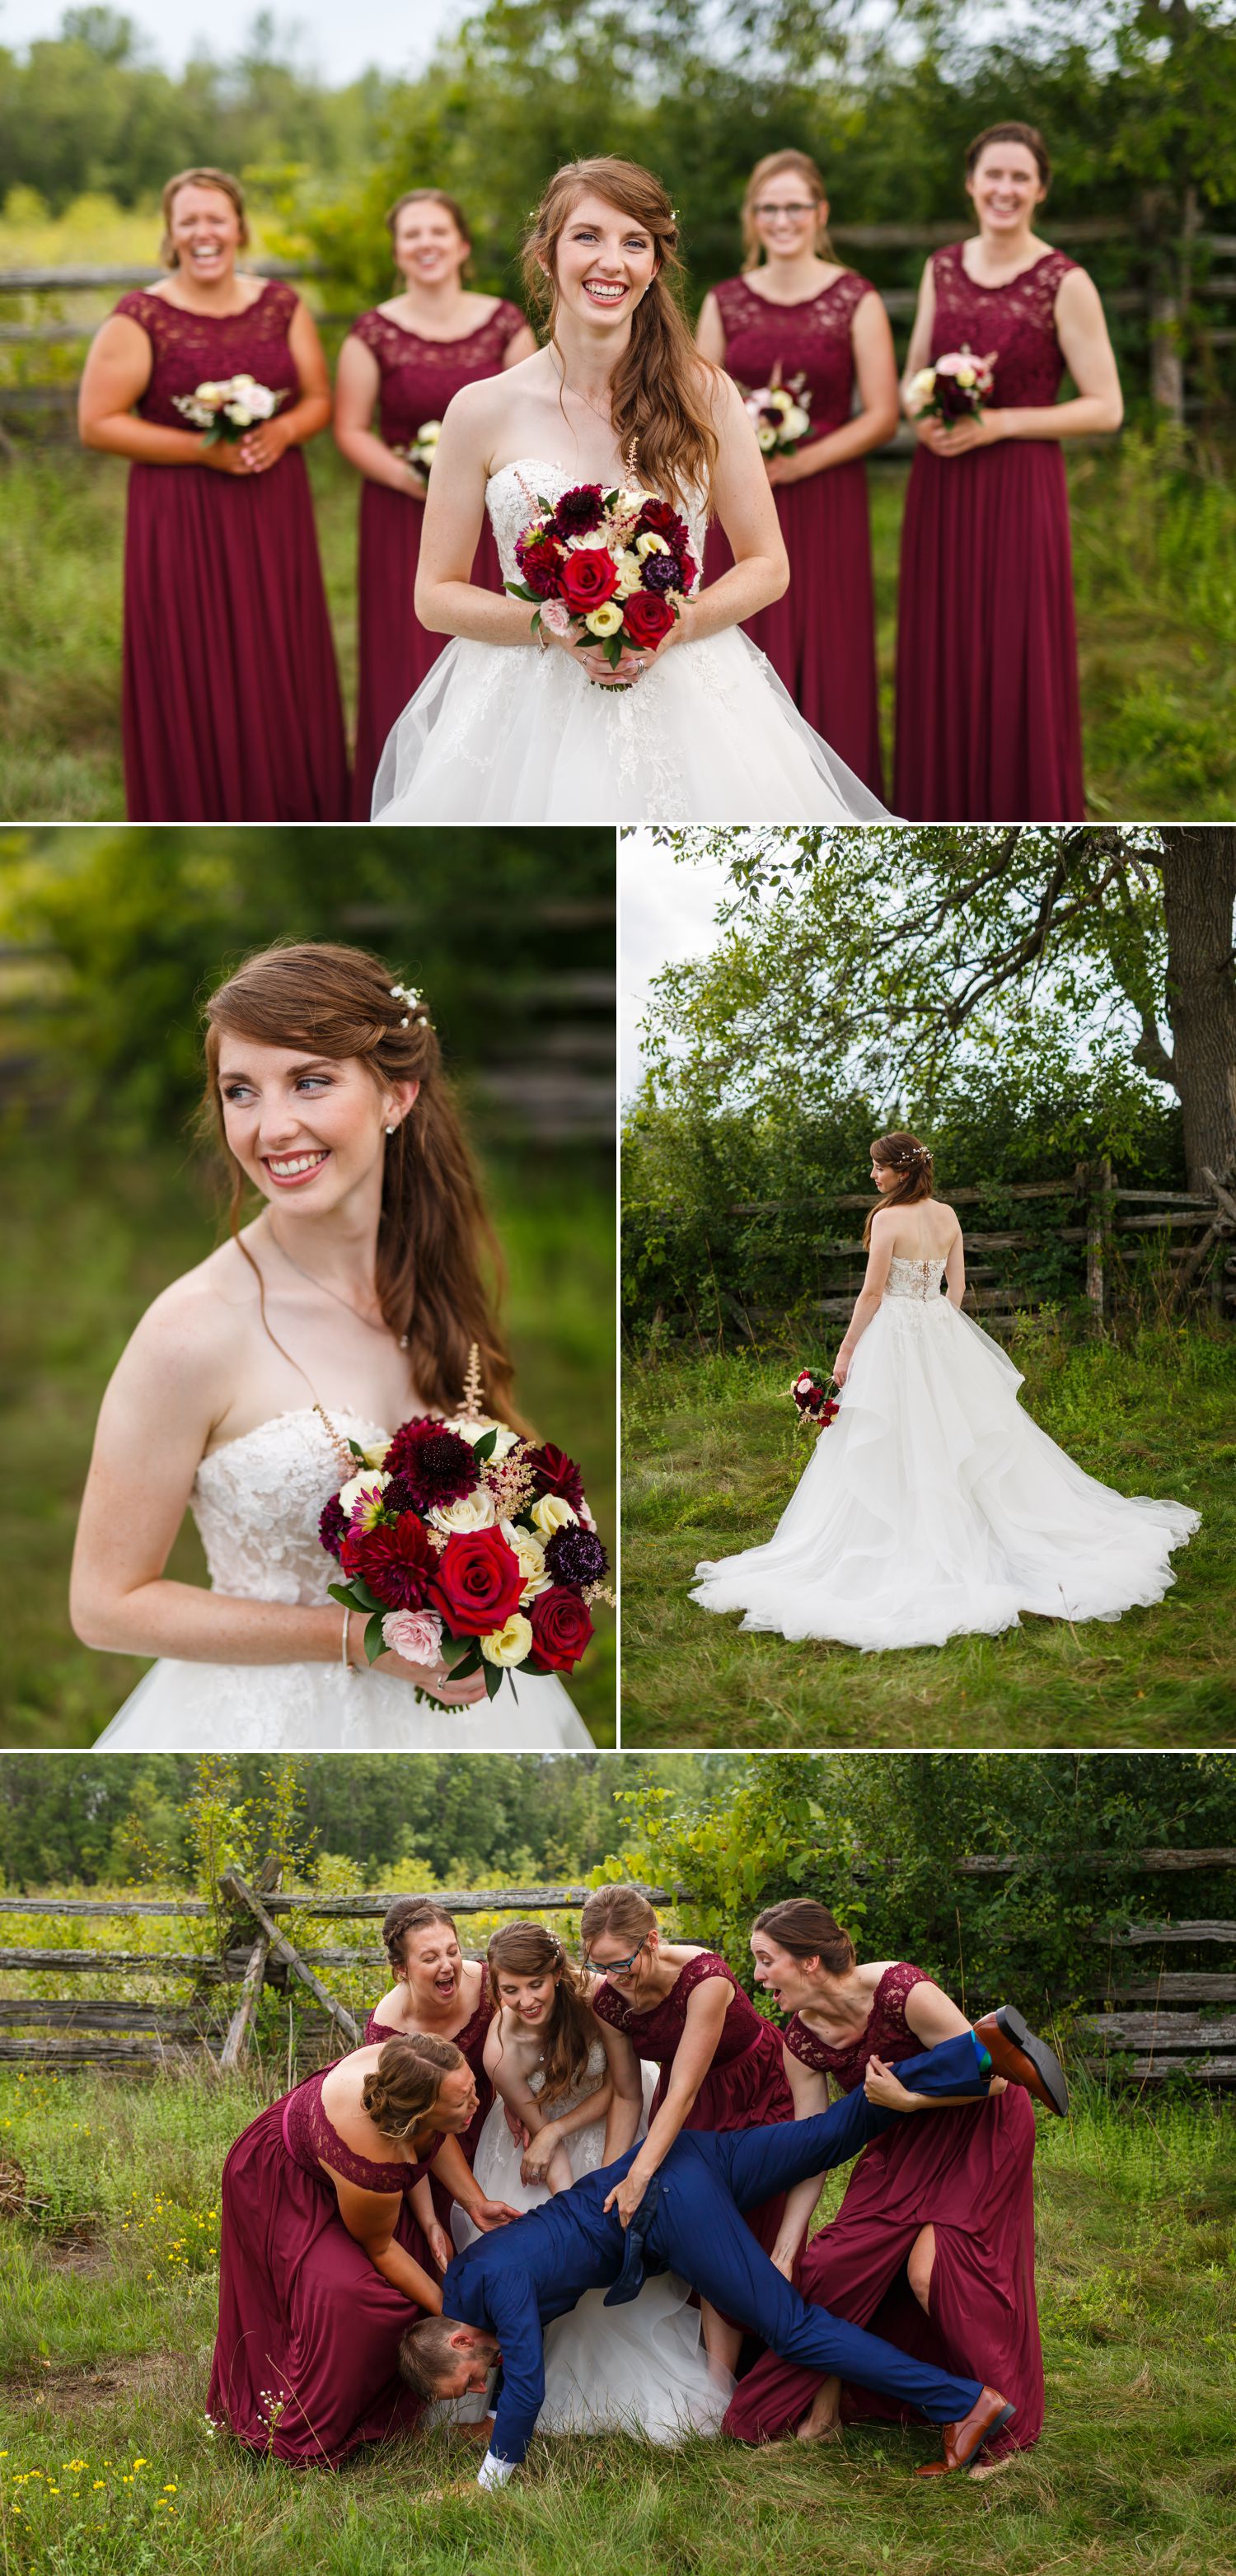 Portraits of the bride and groom with their wedding party at Stonefields Estate